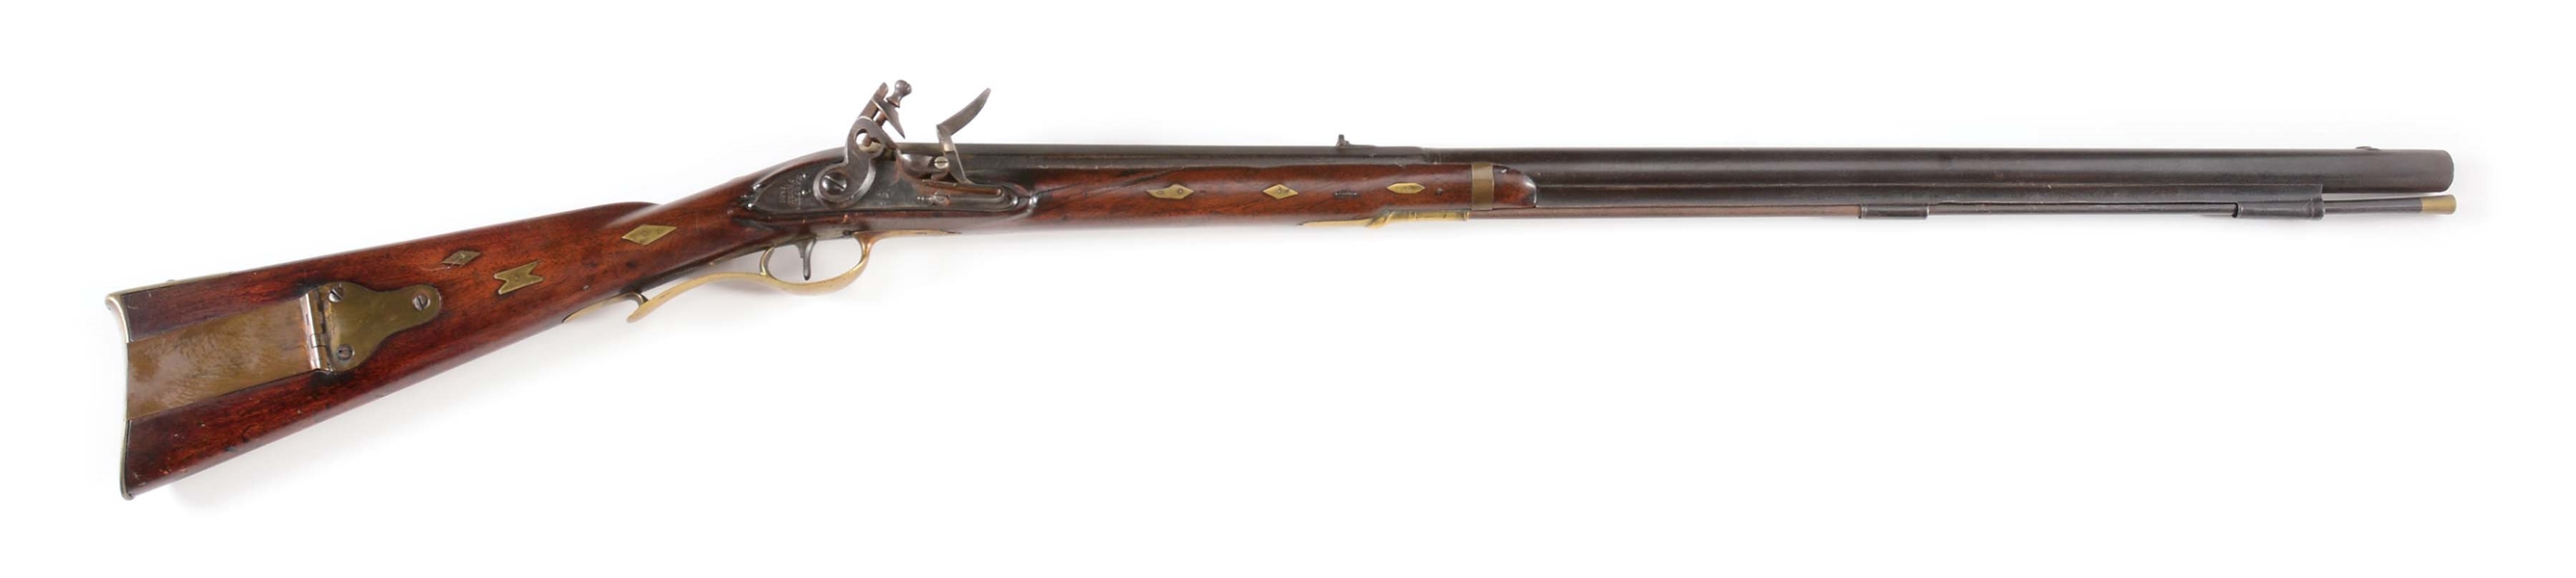 (A) HARPERS FERRY EARLY 1805 RIFLE.